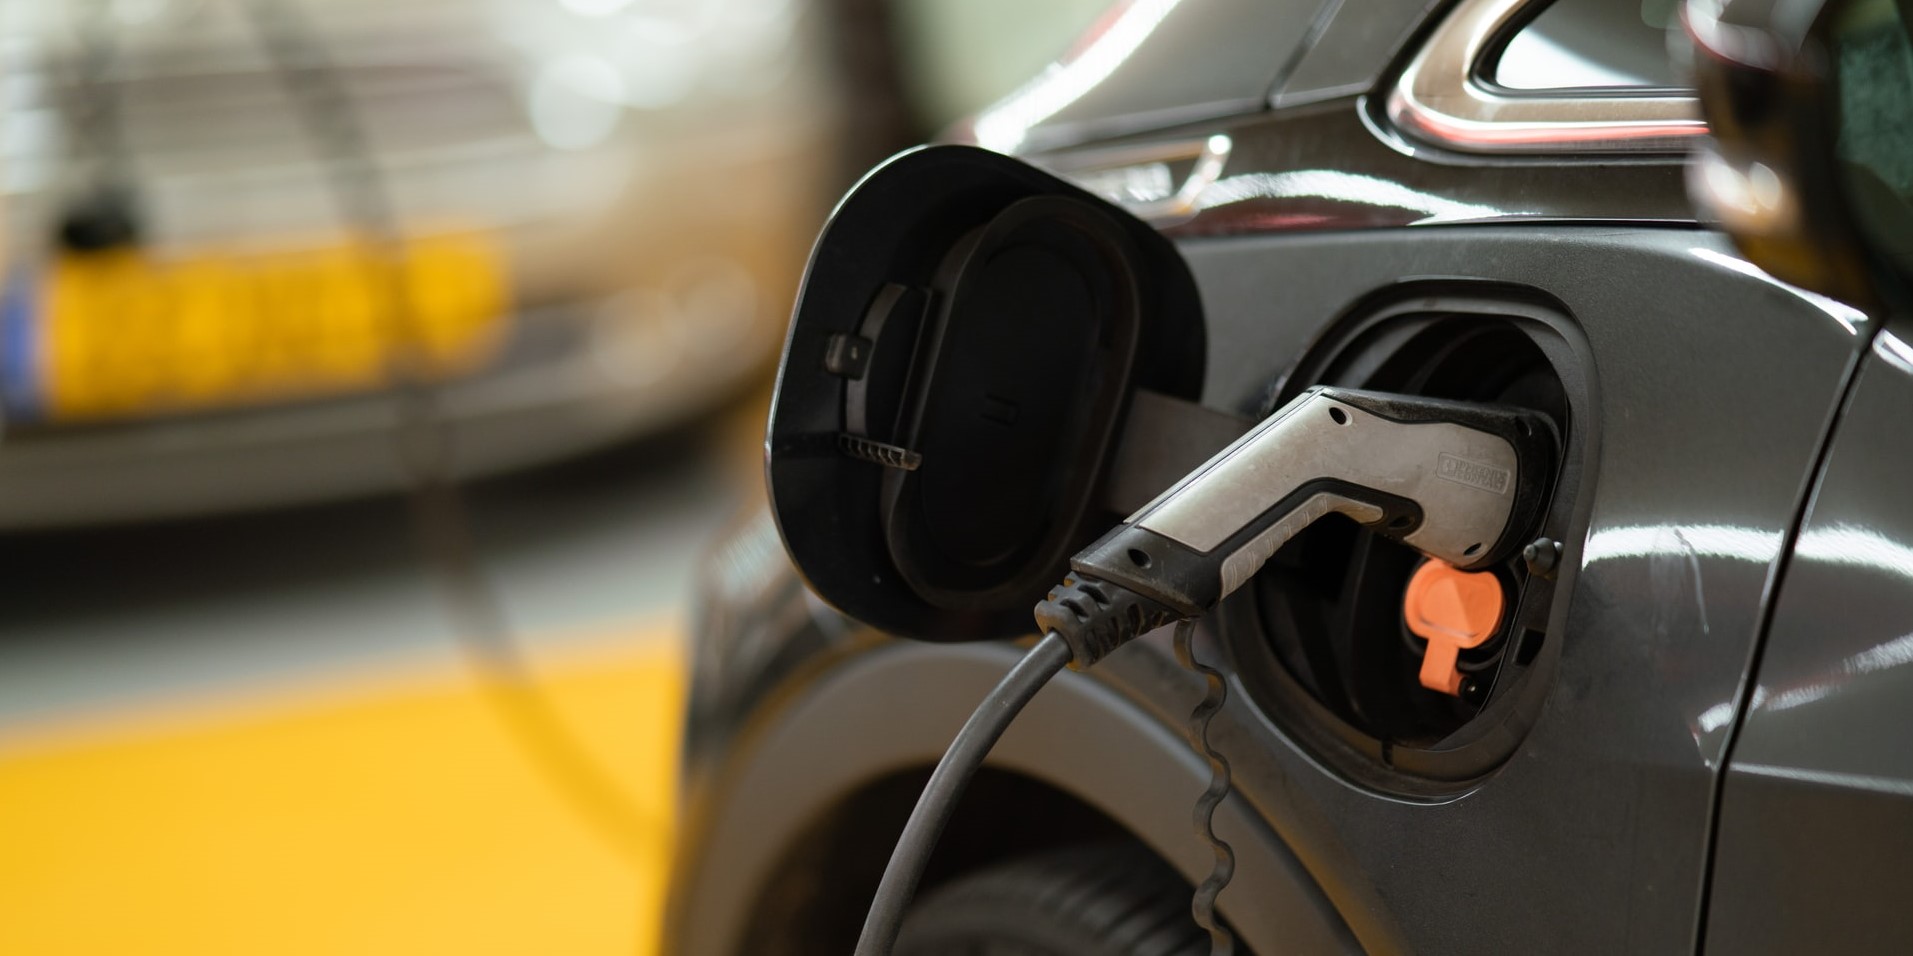 How are Electric Vehicles changing car-buying habits?